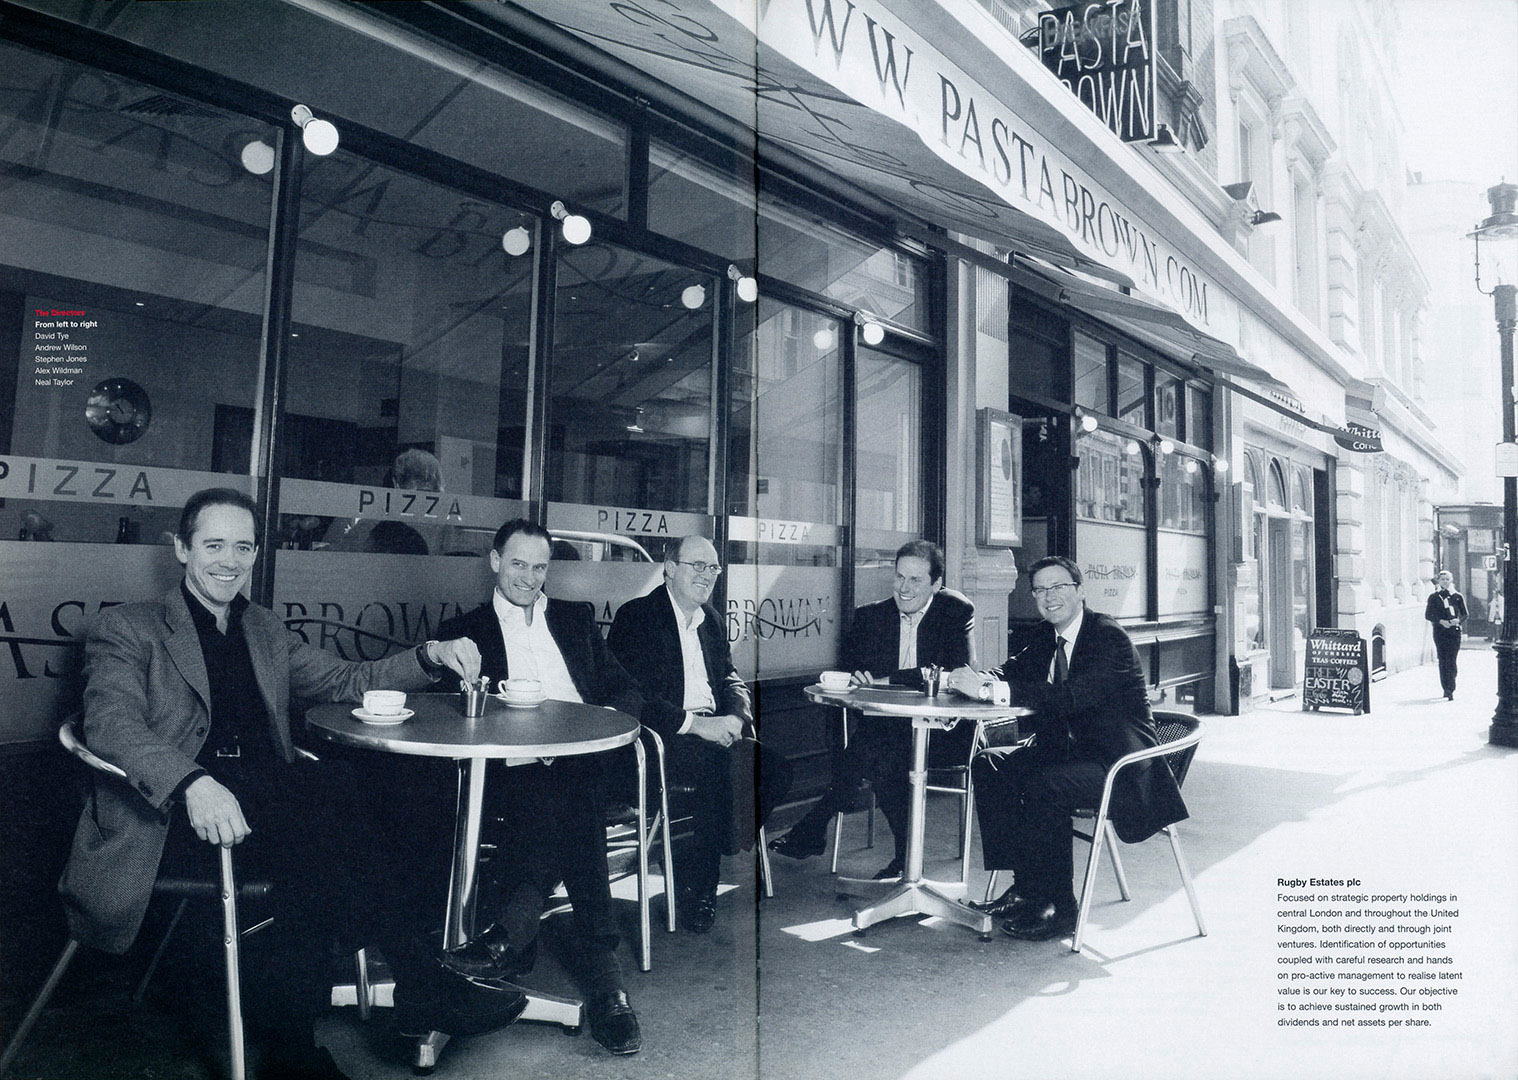 Board of directors of Property Company seated outside a London Cafe